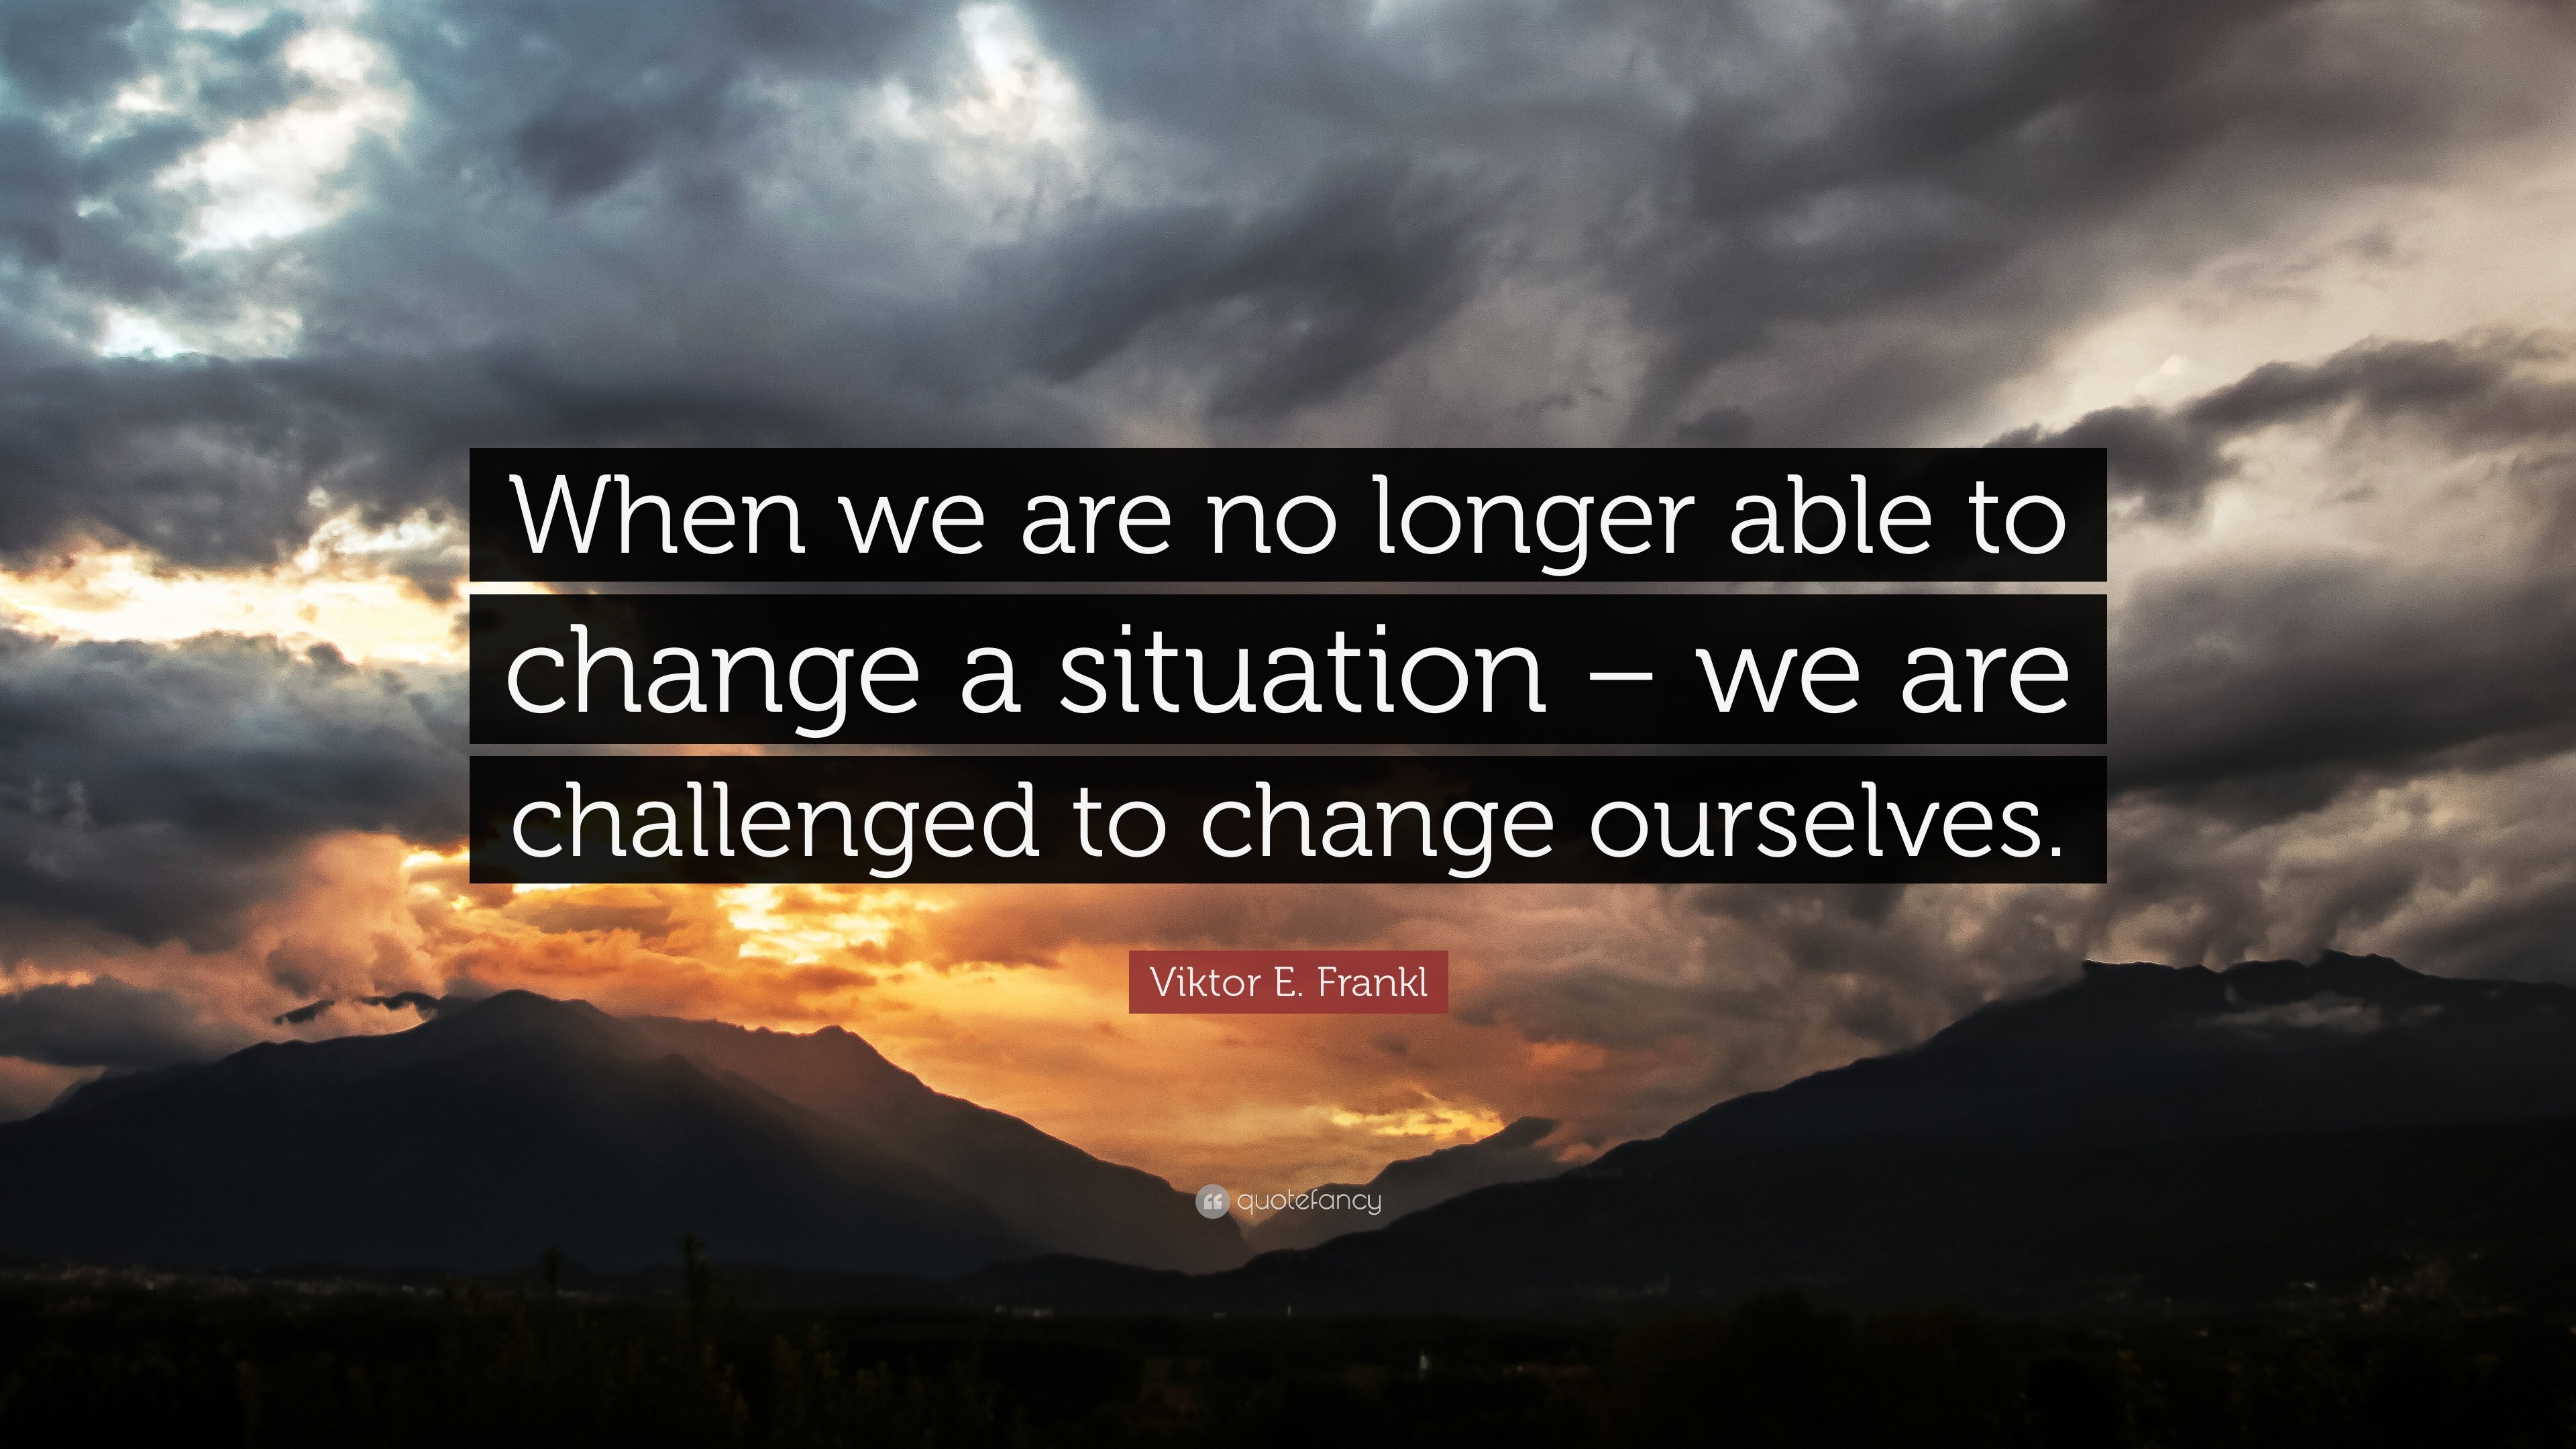 Viktor E Frankl Quote “When we are no longer able to change a